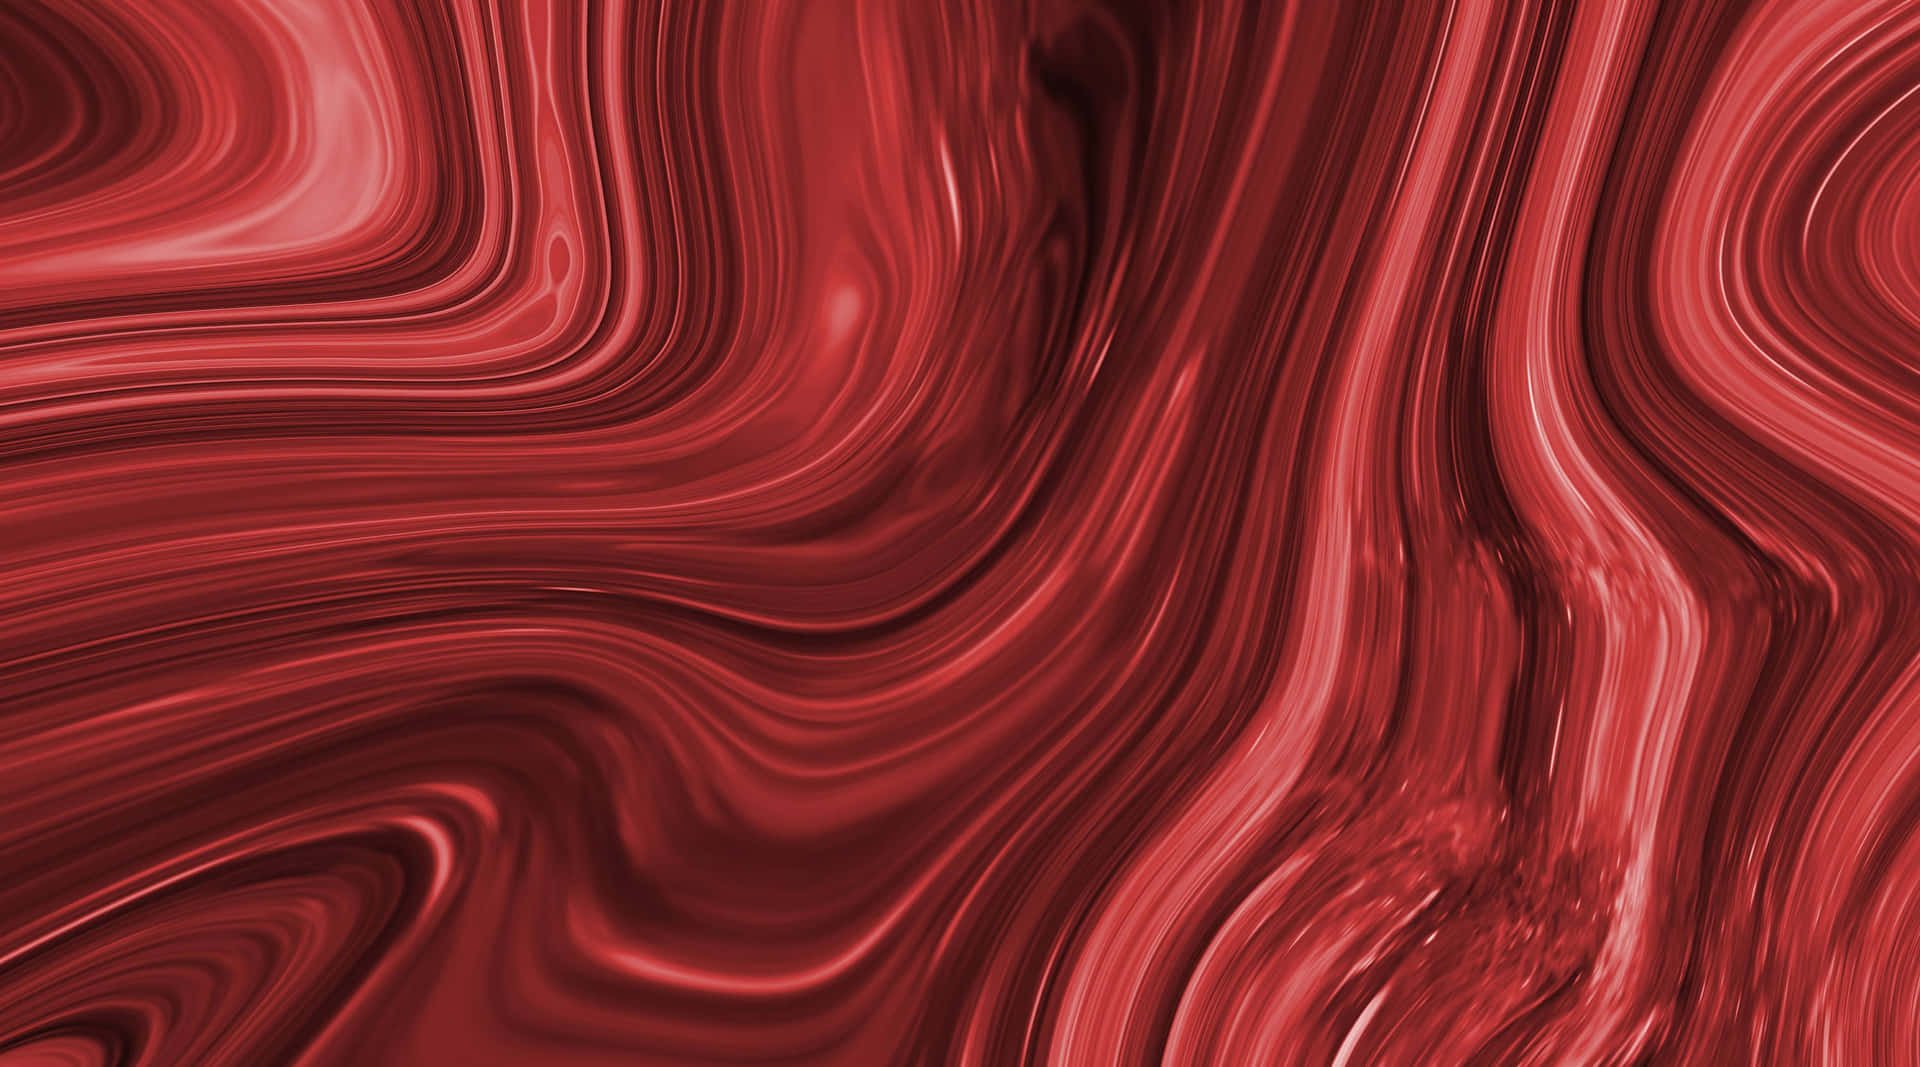 An opulent red marble background